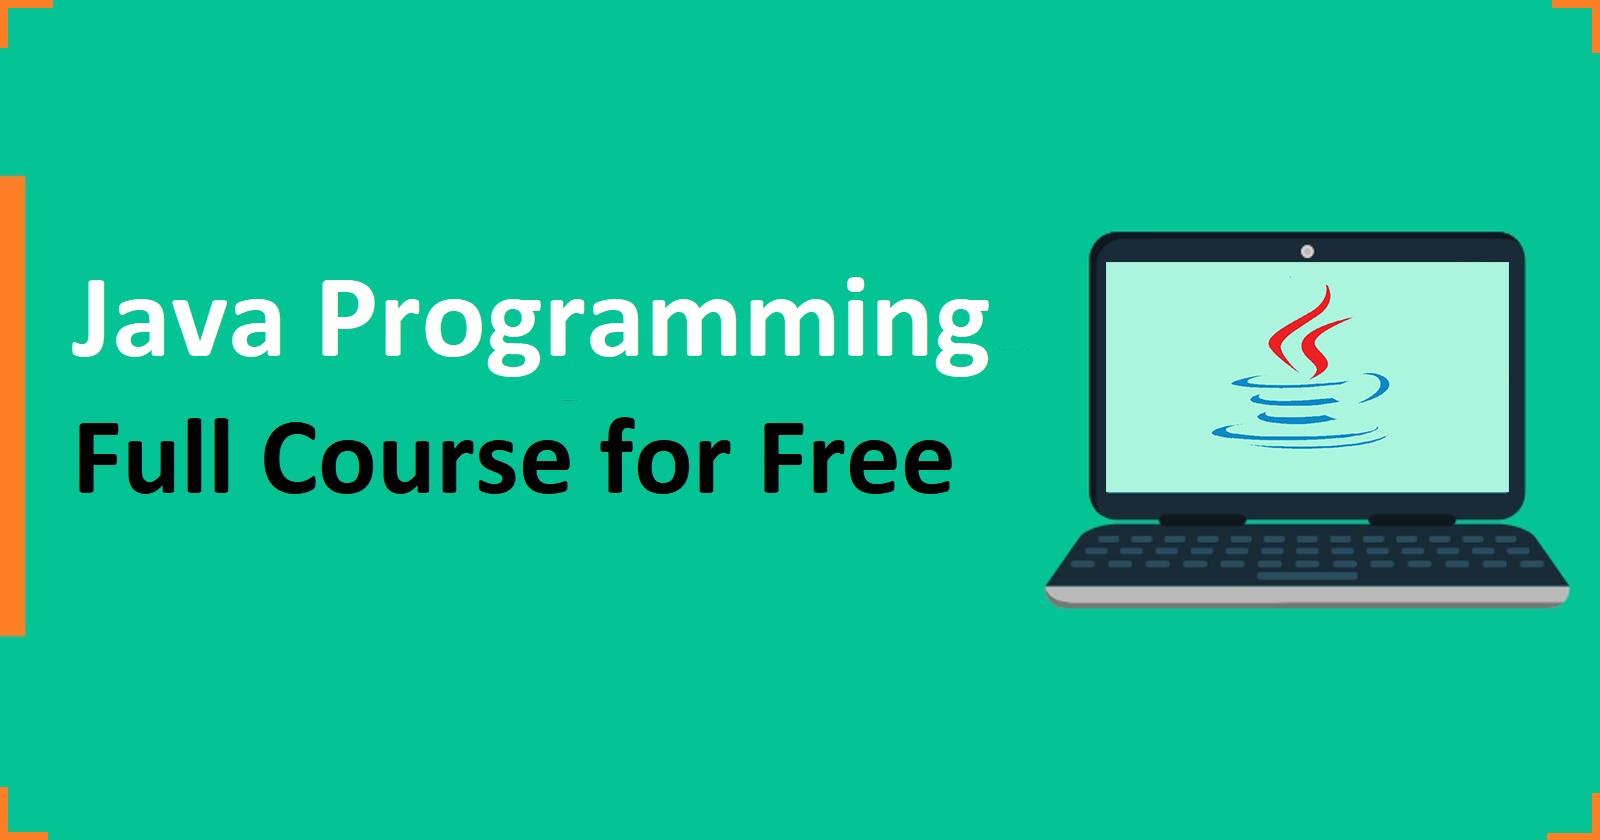 Why And Where You Can Learn Java Programming Full Courses For Free